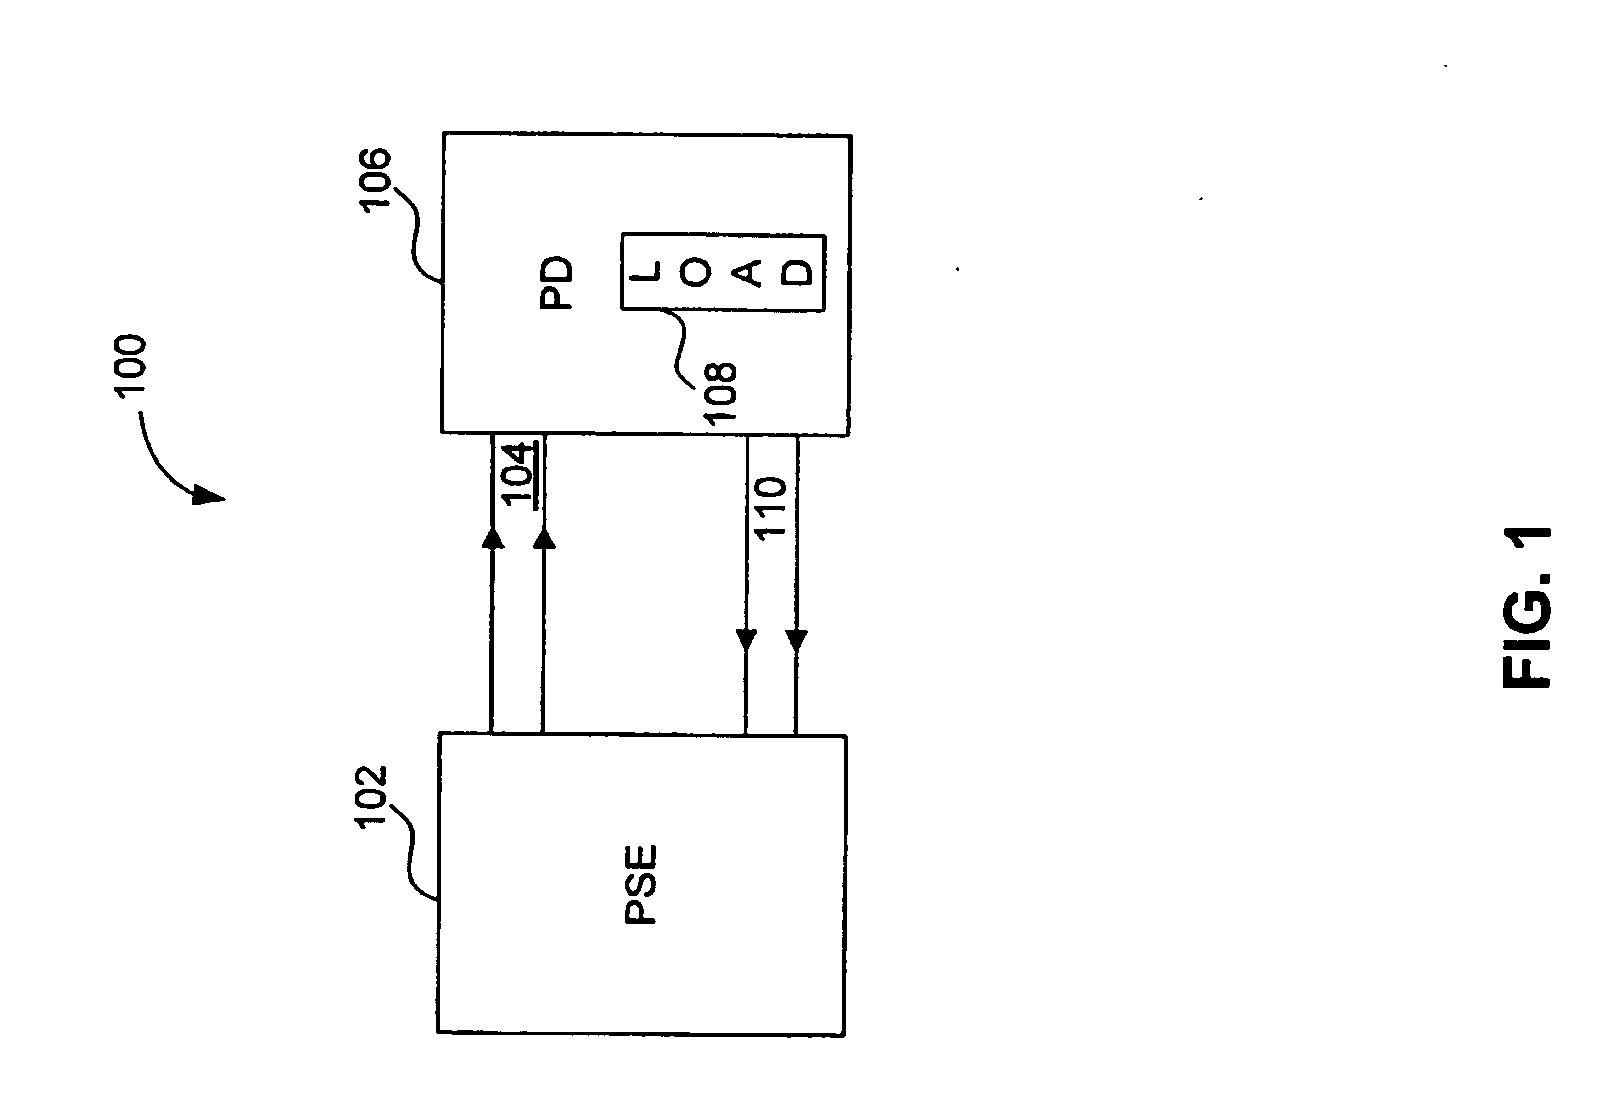 Apparatus for sensing an output current in a communications device